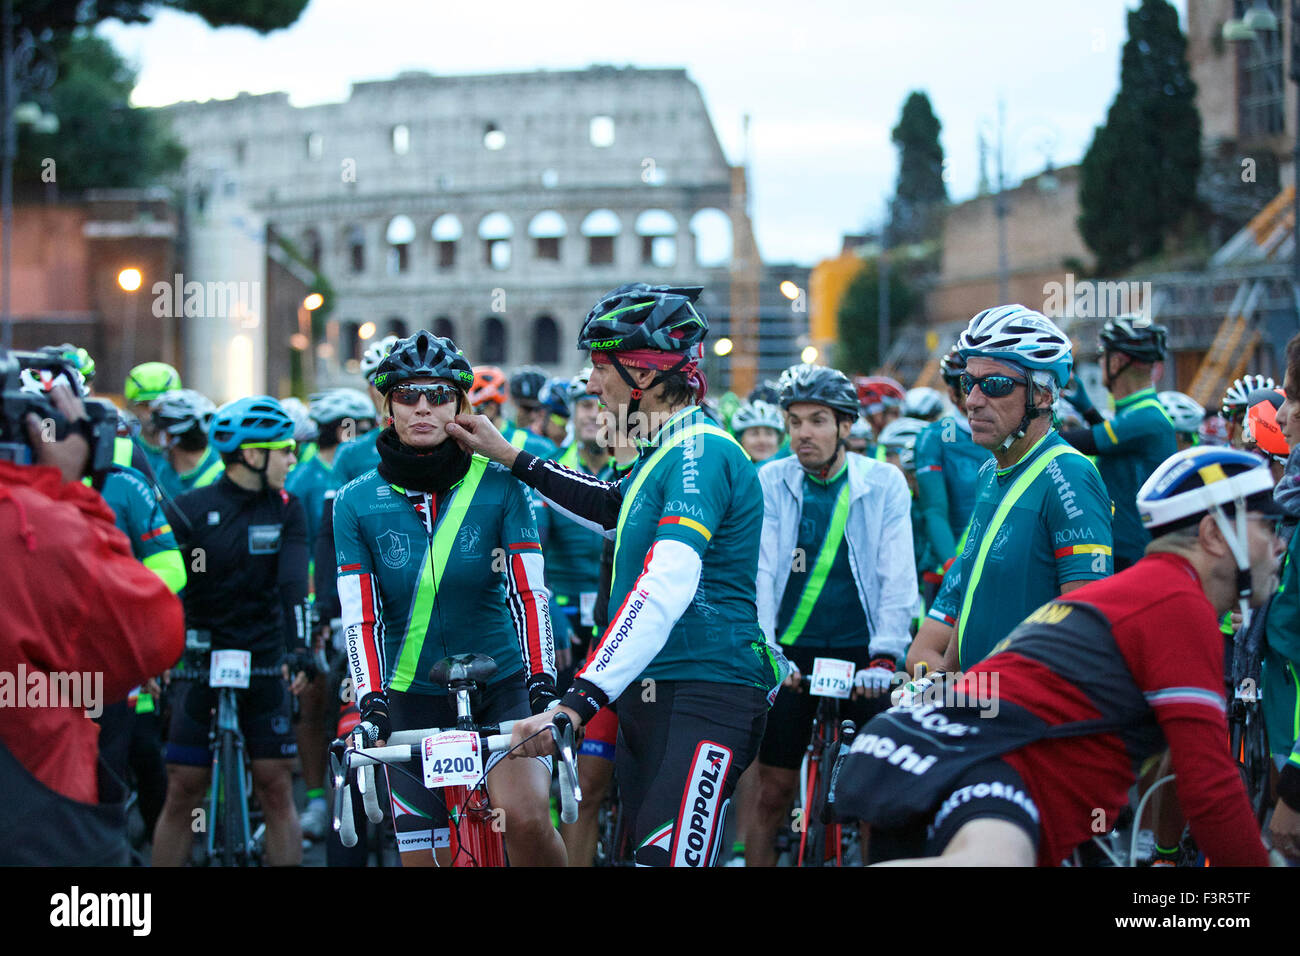 Rome, Italy. 11th Oct, 2015. Cyclists wait for the start of the historical cycling event 'Granfondo Campagnolo Rome' in Rome, Italy, on Oct. 11, 2015. The event attracted 5200 cyclists from 40 countries and regions. Cyclists started from the Colosseum, symbol of the Eternal City, cycling to historical spots in ancient Rome, Tiber River and Venice Square, and traveled out to the Roman hills. Finally, they rode past the cobblestones of ancient Appian Way to cross the finishing line. Credit:  Jin Yu/Xinhua/Alamy Live News Stock Photo